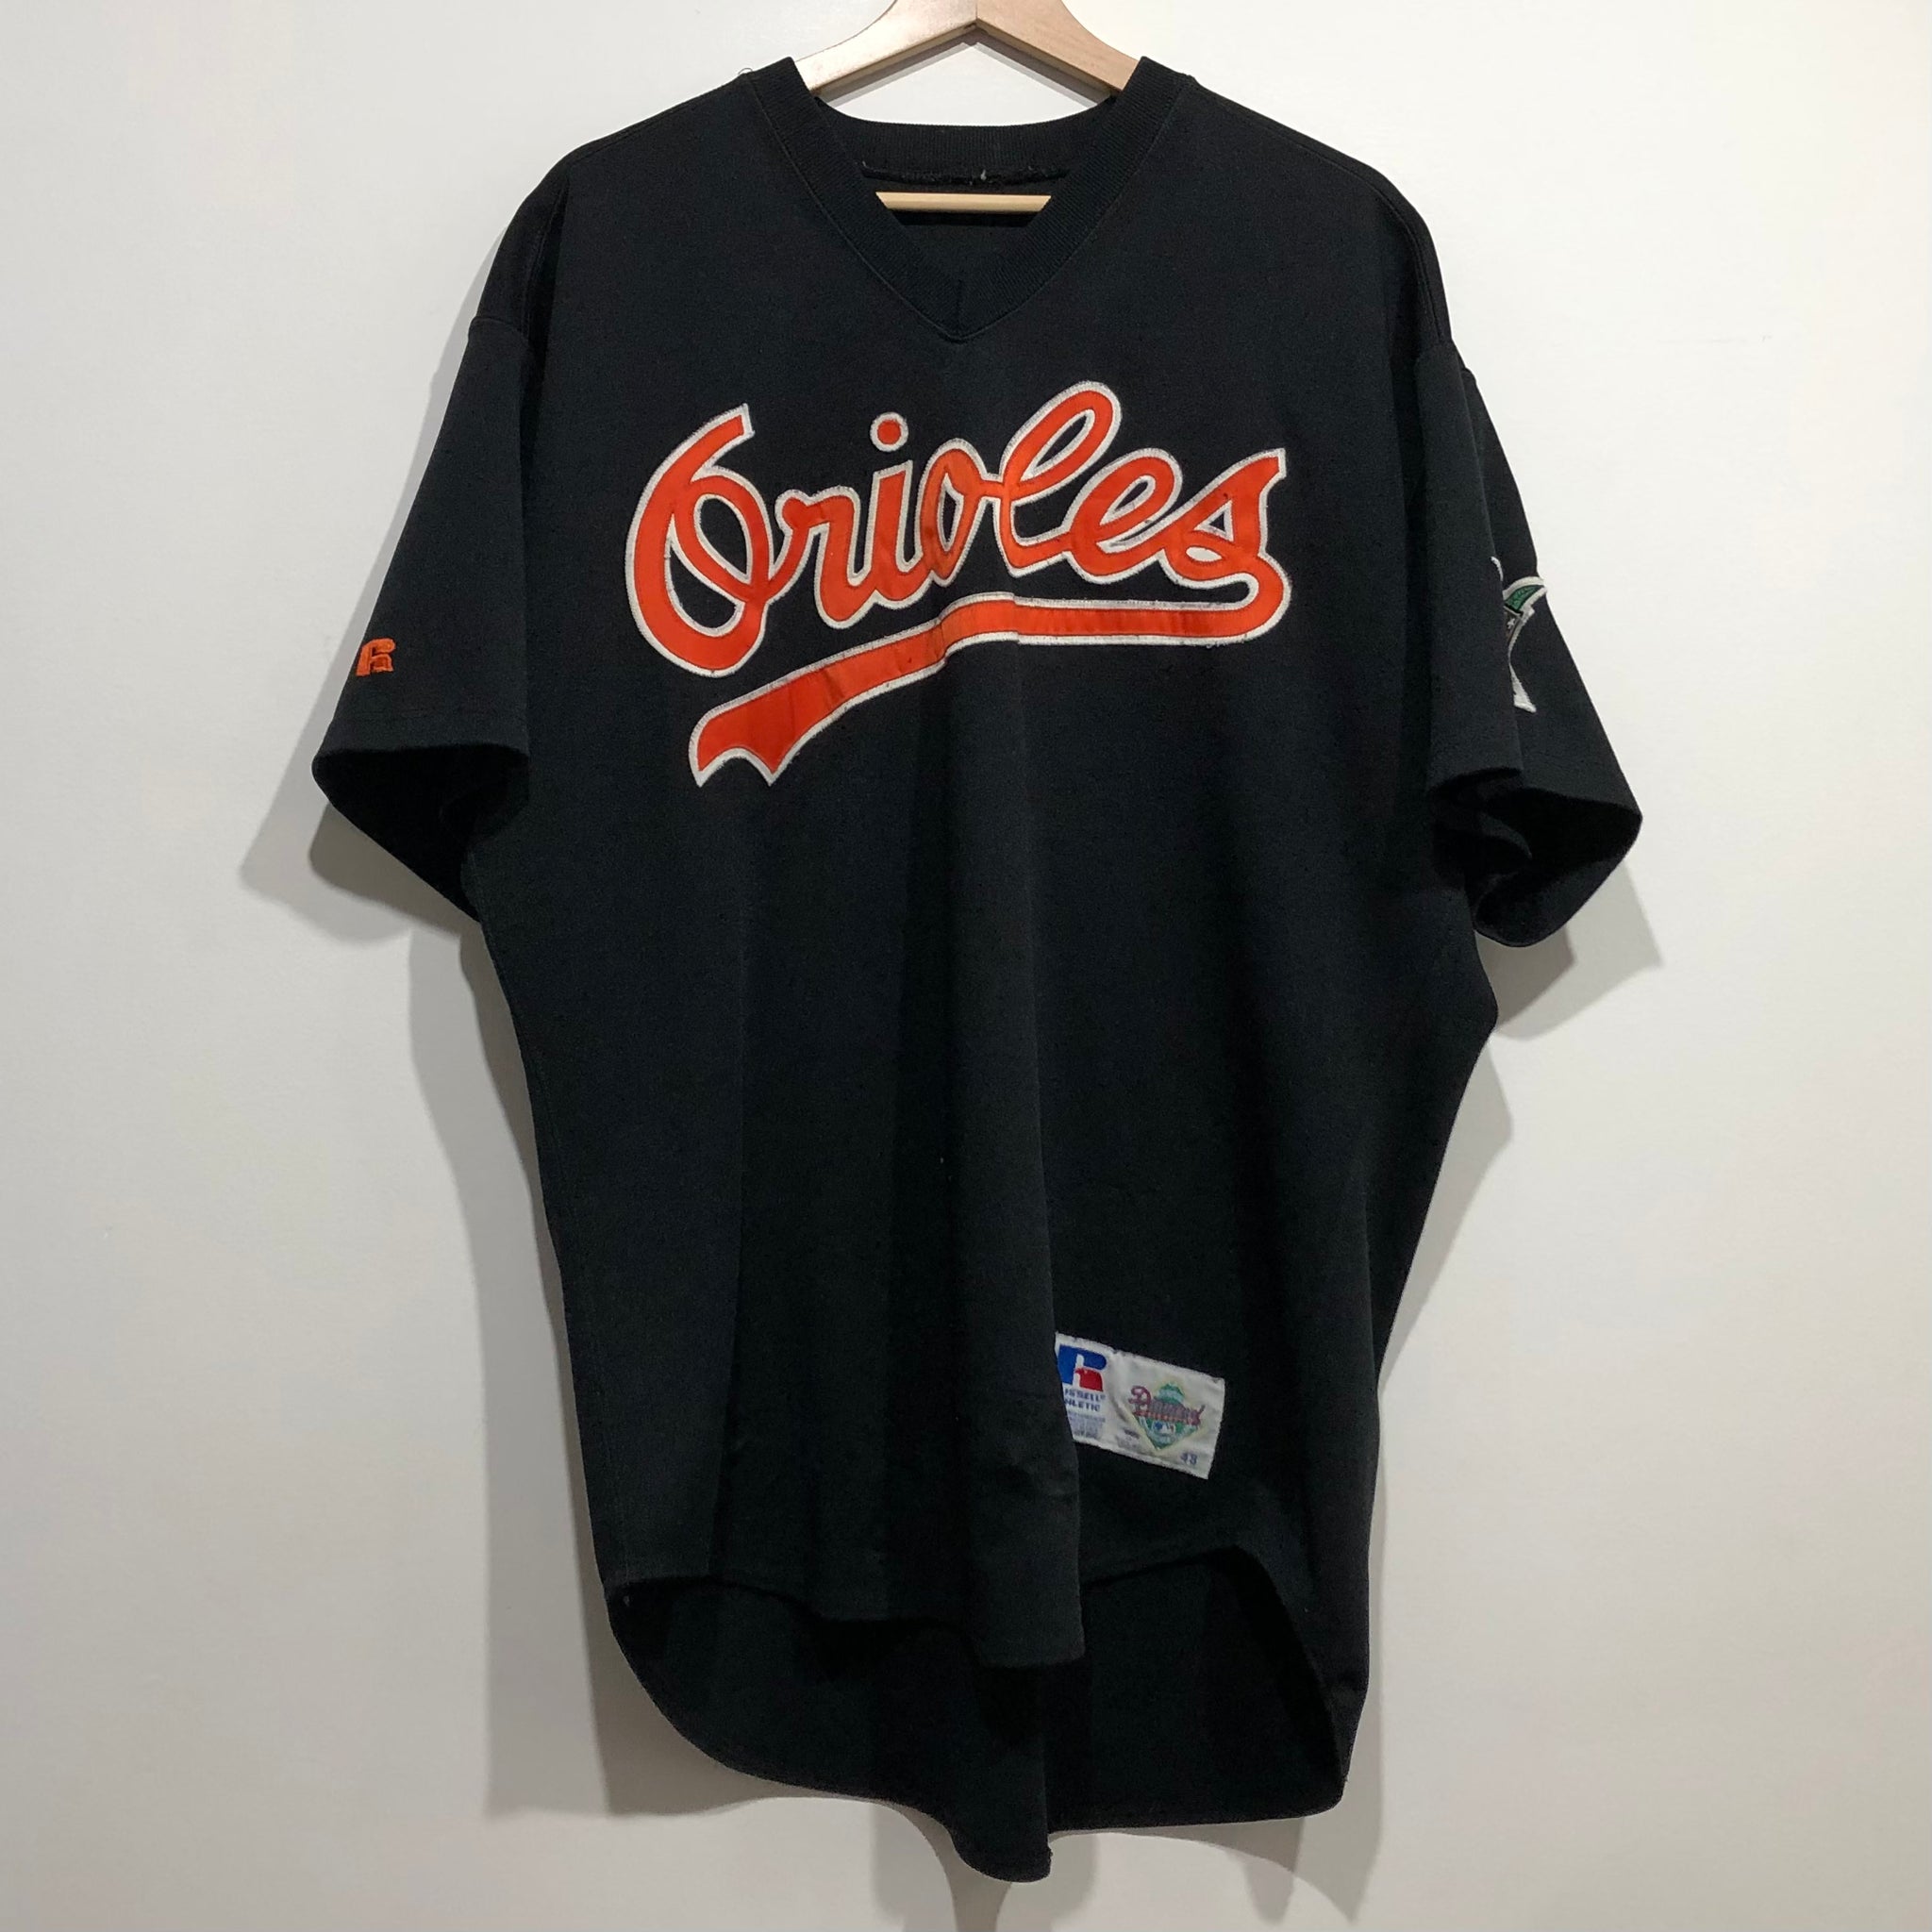 Russell Athletic, Shirts, Vintage Baltimore Orioles Jersey